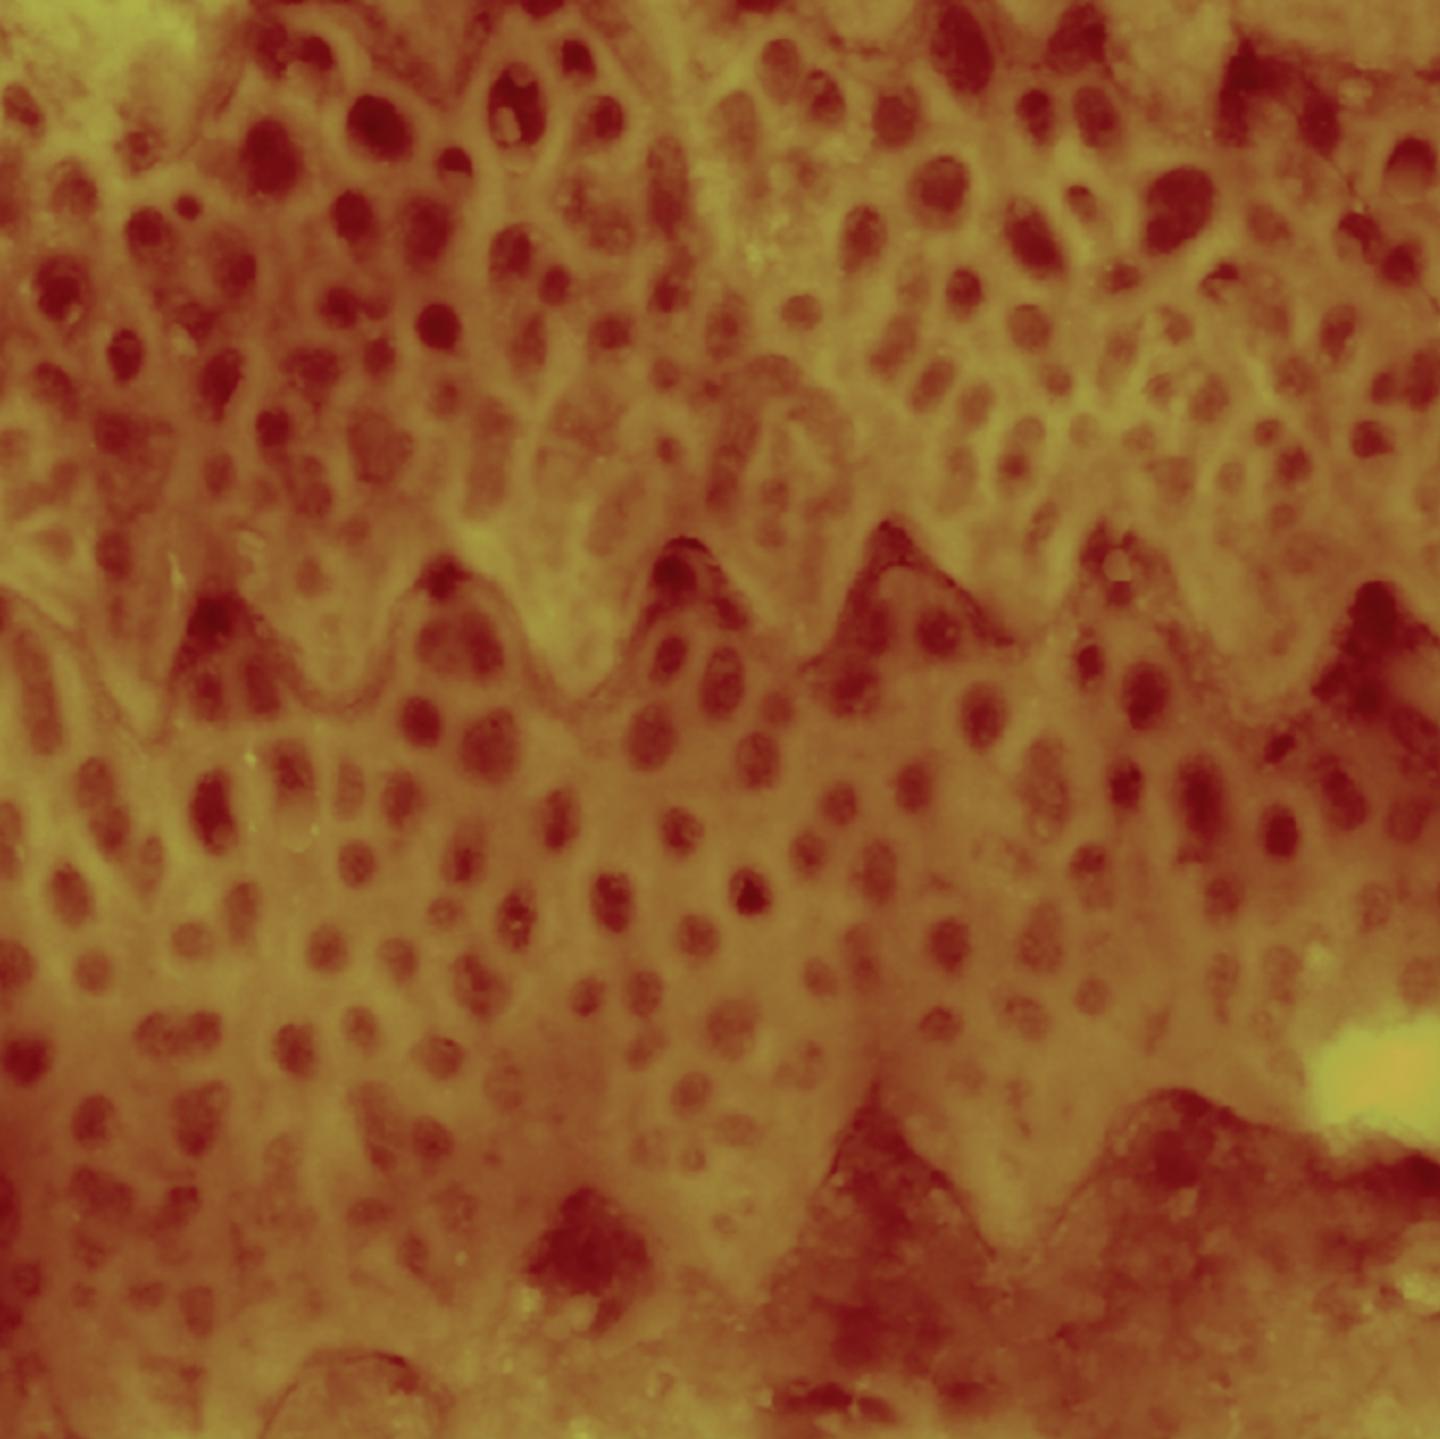 Microstructures from sidewinder snake